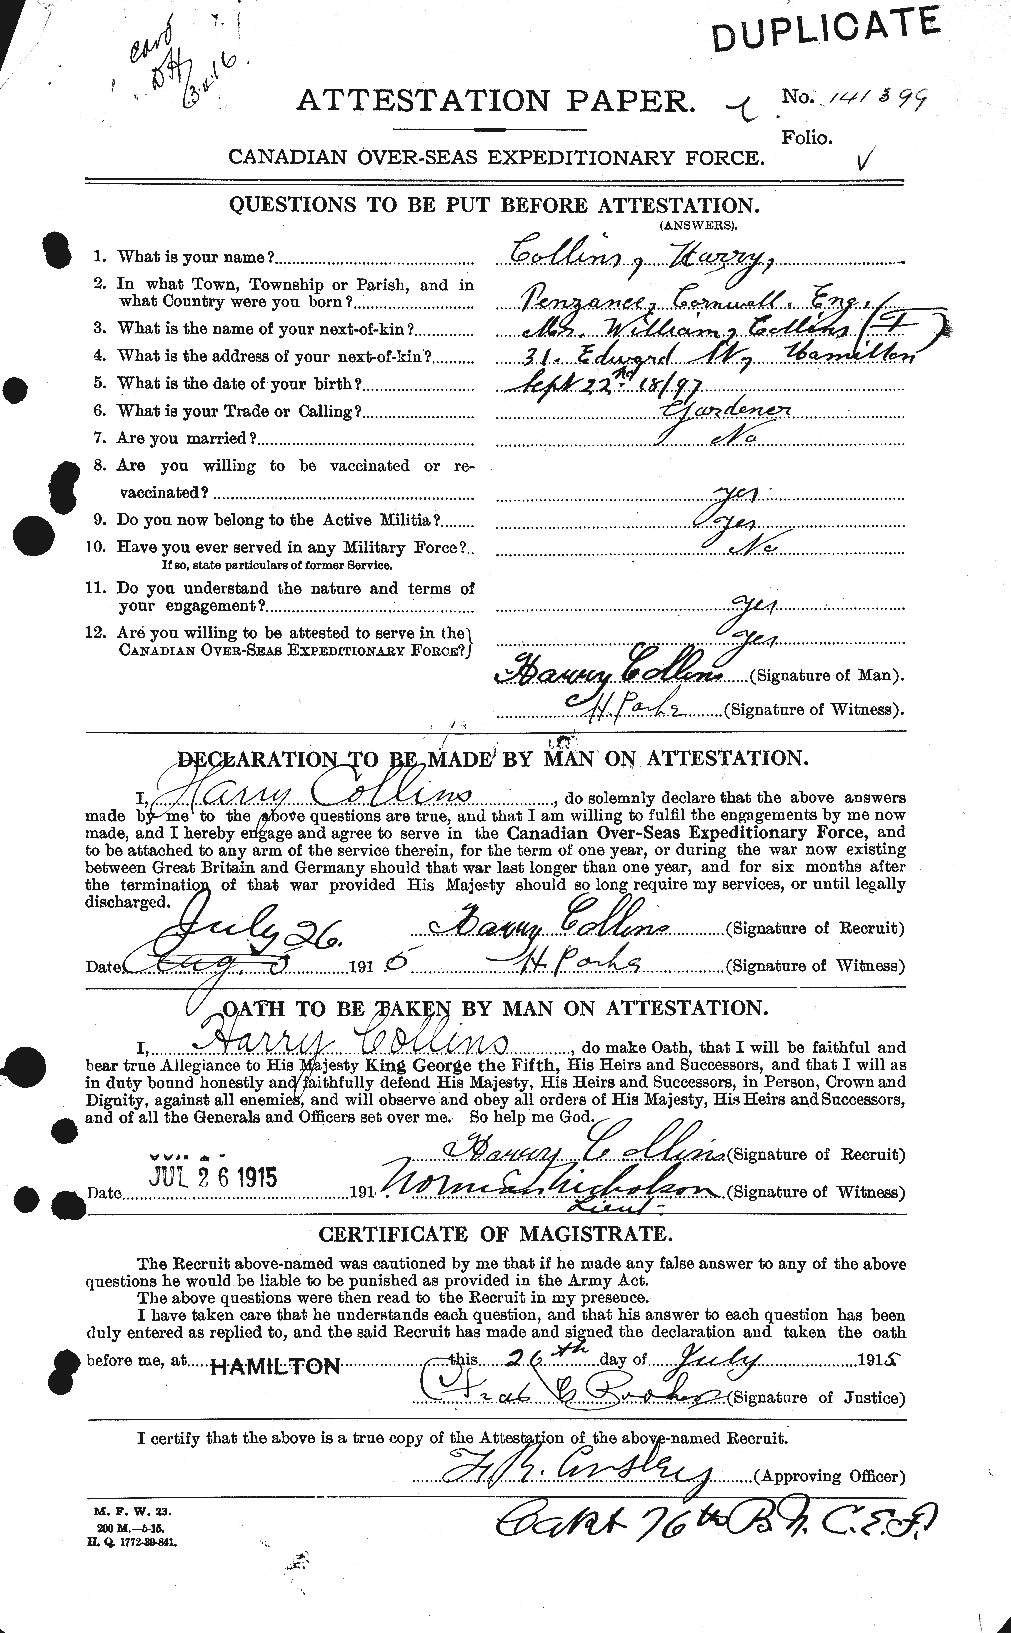 Personnel Records of the First World War - CEF 070025a